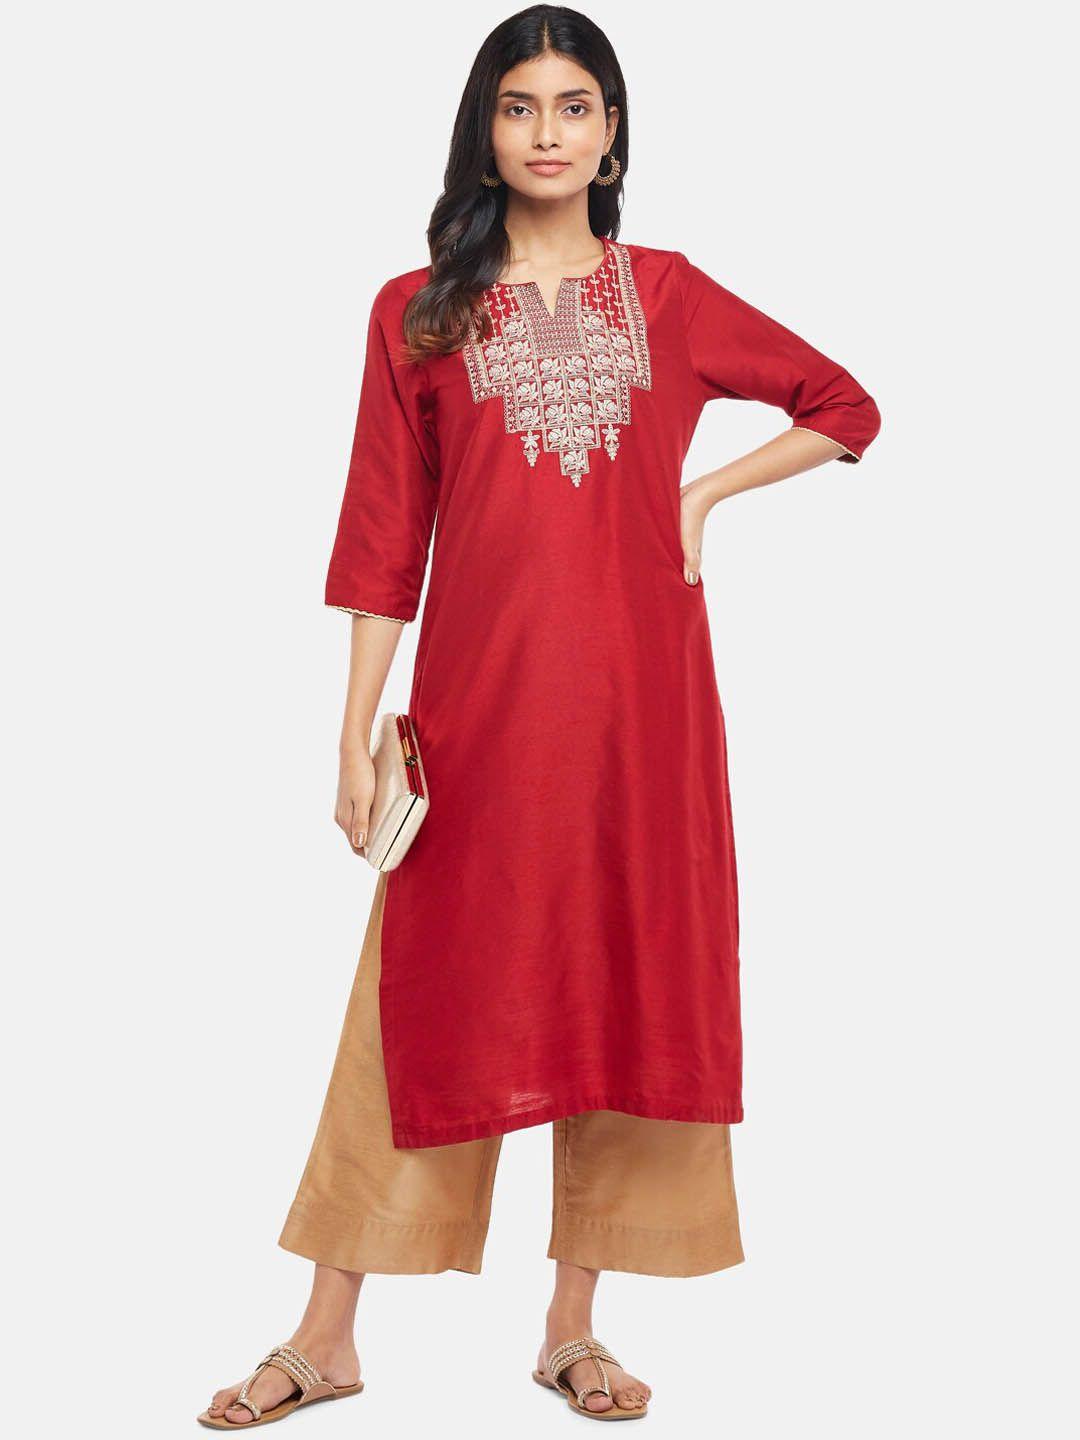 rangmanch by pantaloons women red floral embroidered kurta